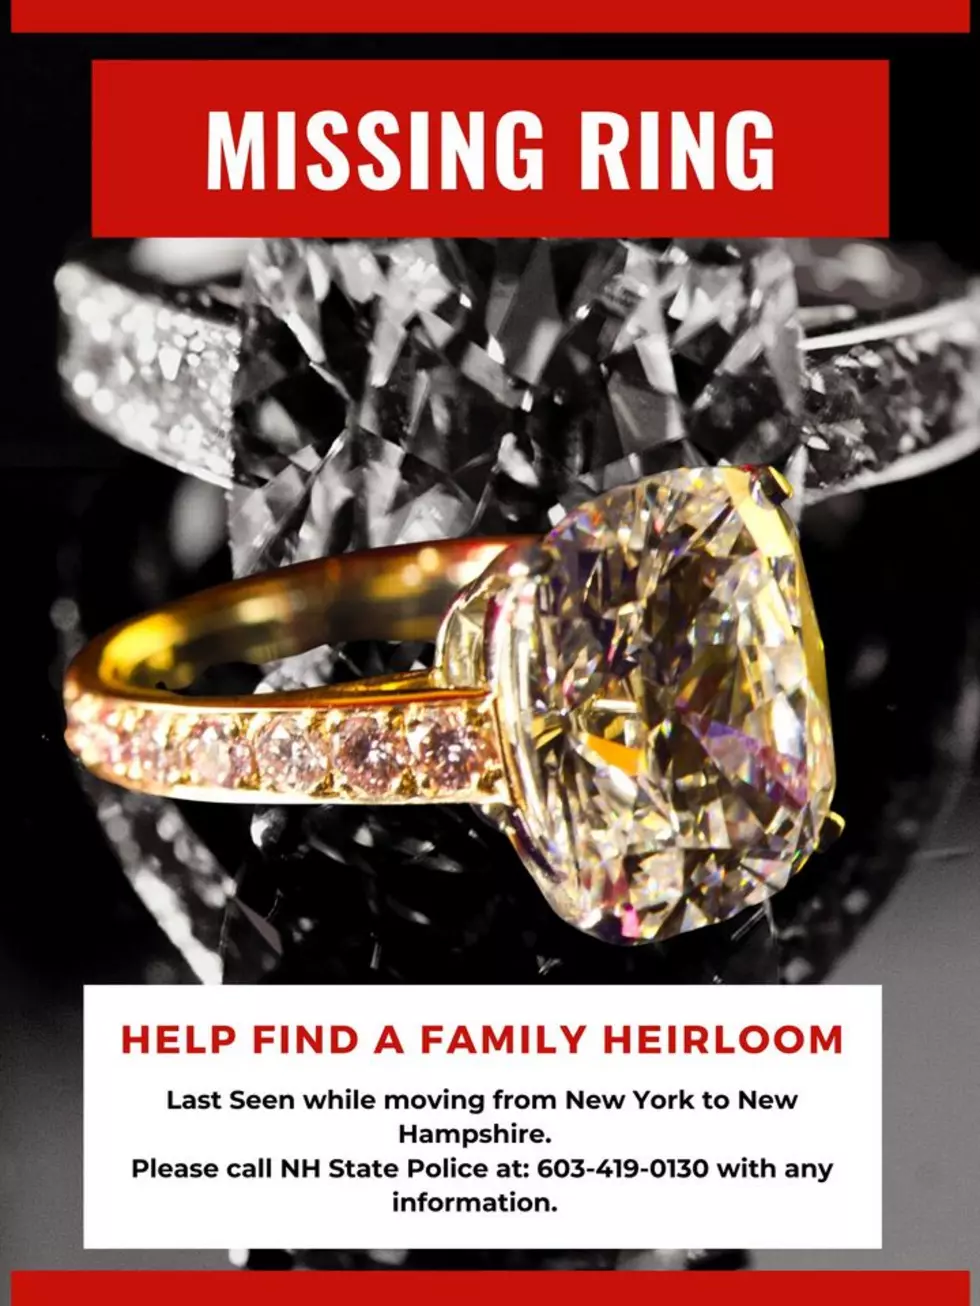 New Hampshire Family Missing Family Heirloom Needs Our Help